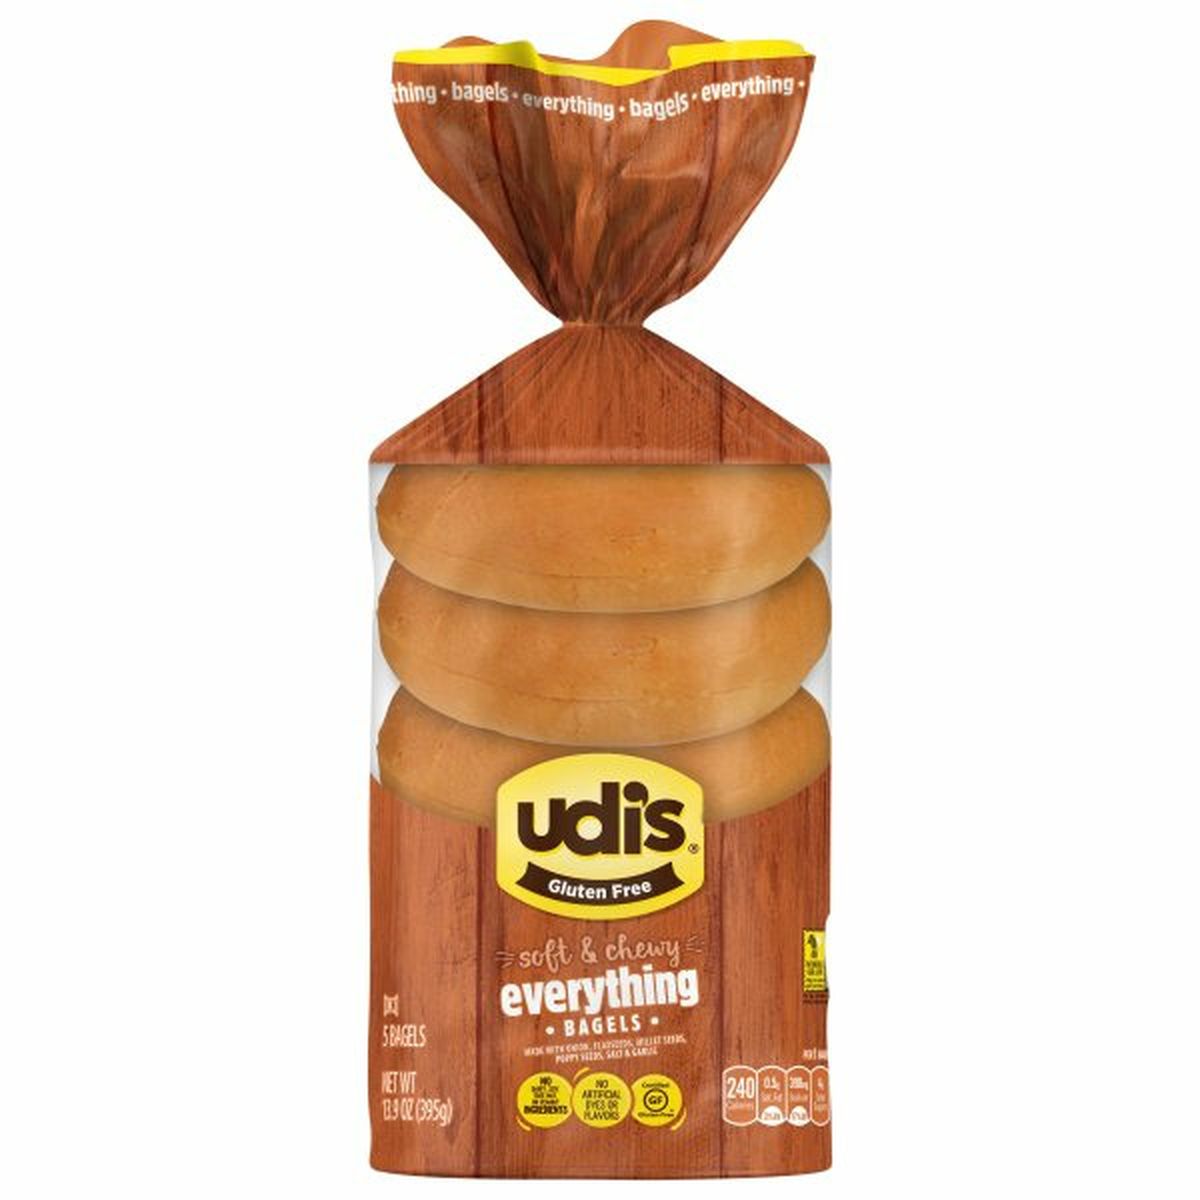 Calories in Udi's Bagels, Gluten Free, Everything, Soft & Chewy